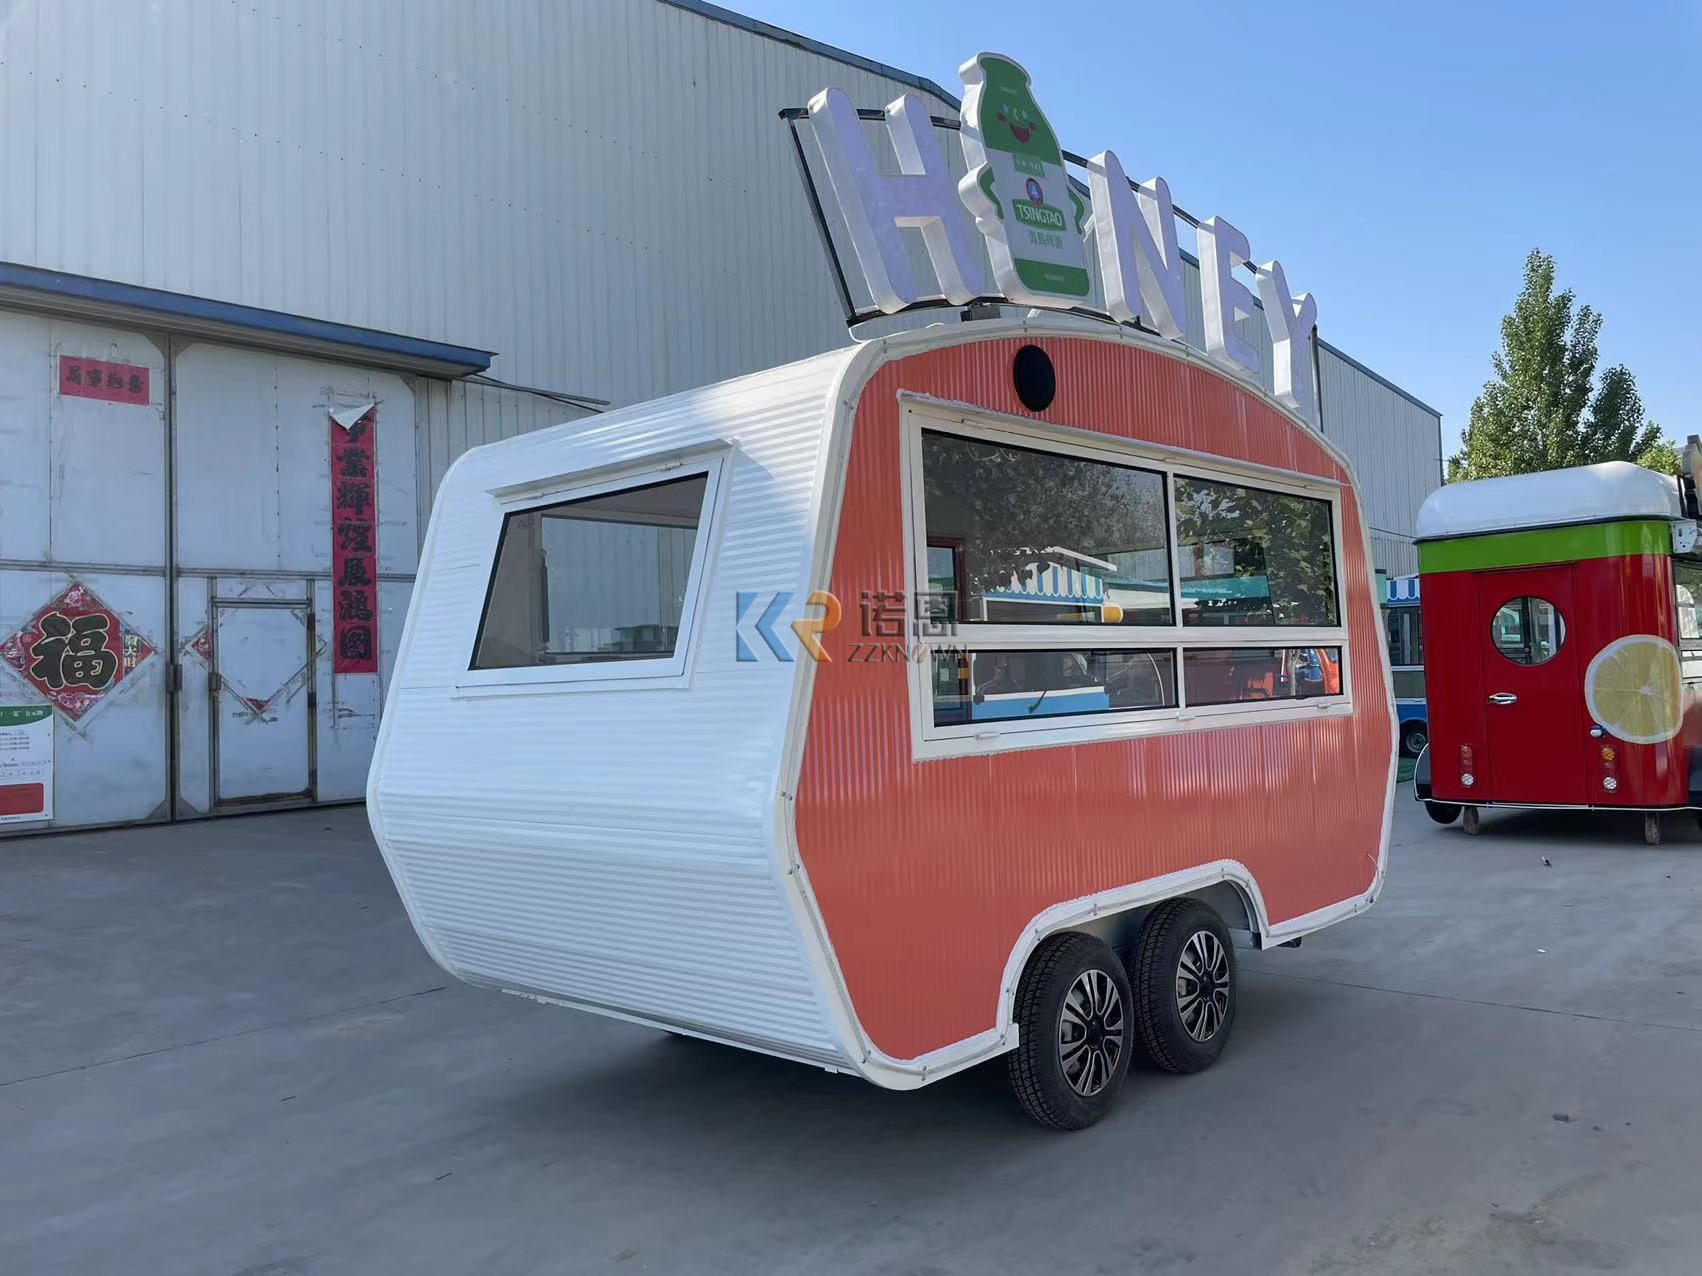 KN-YX-400X Hot Selling Mobile Food Kiosk Catering Trailer Sushi Food Truck Coffee Stall Food Van